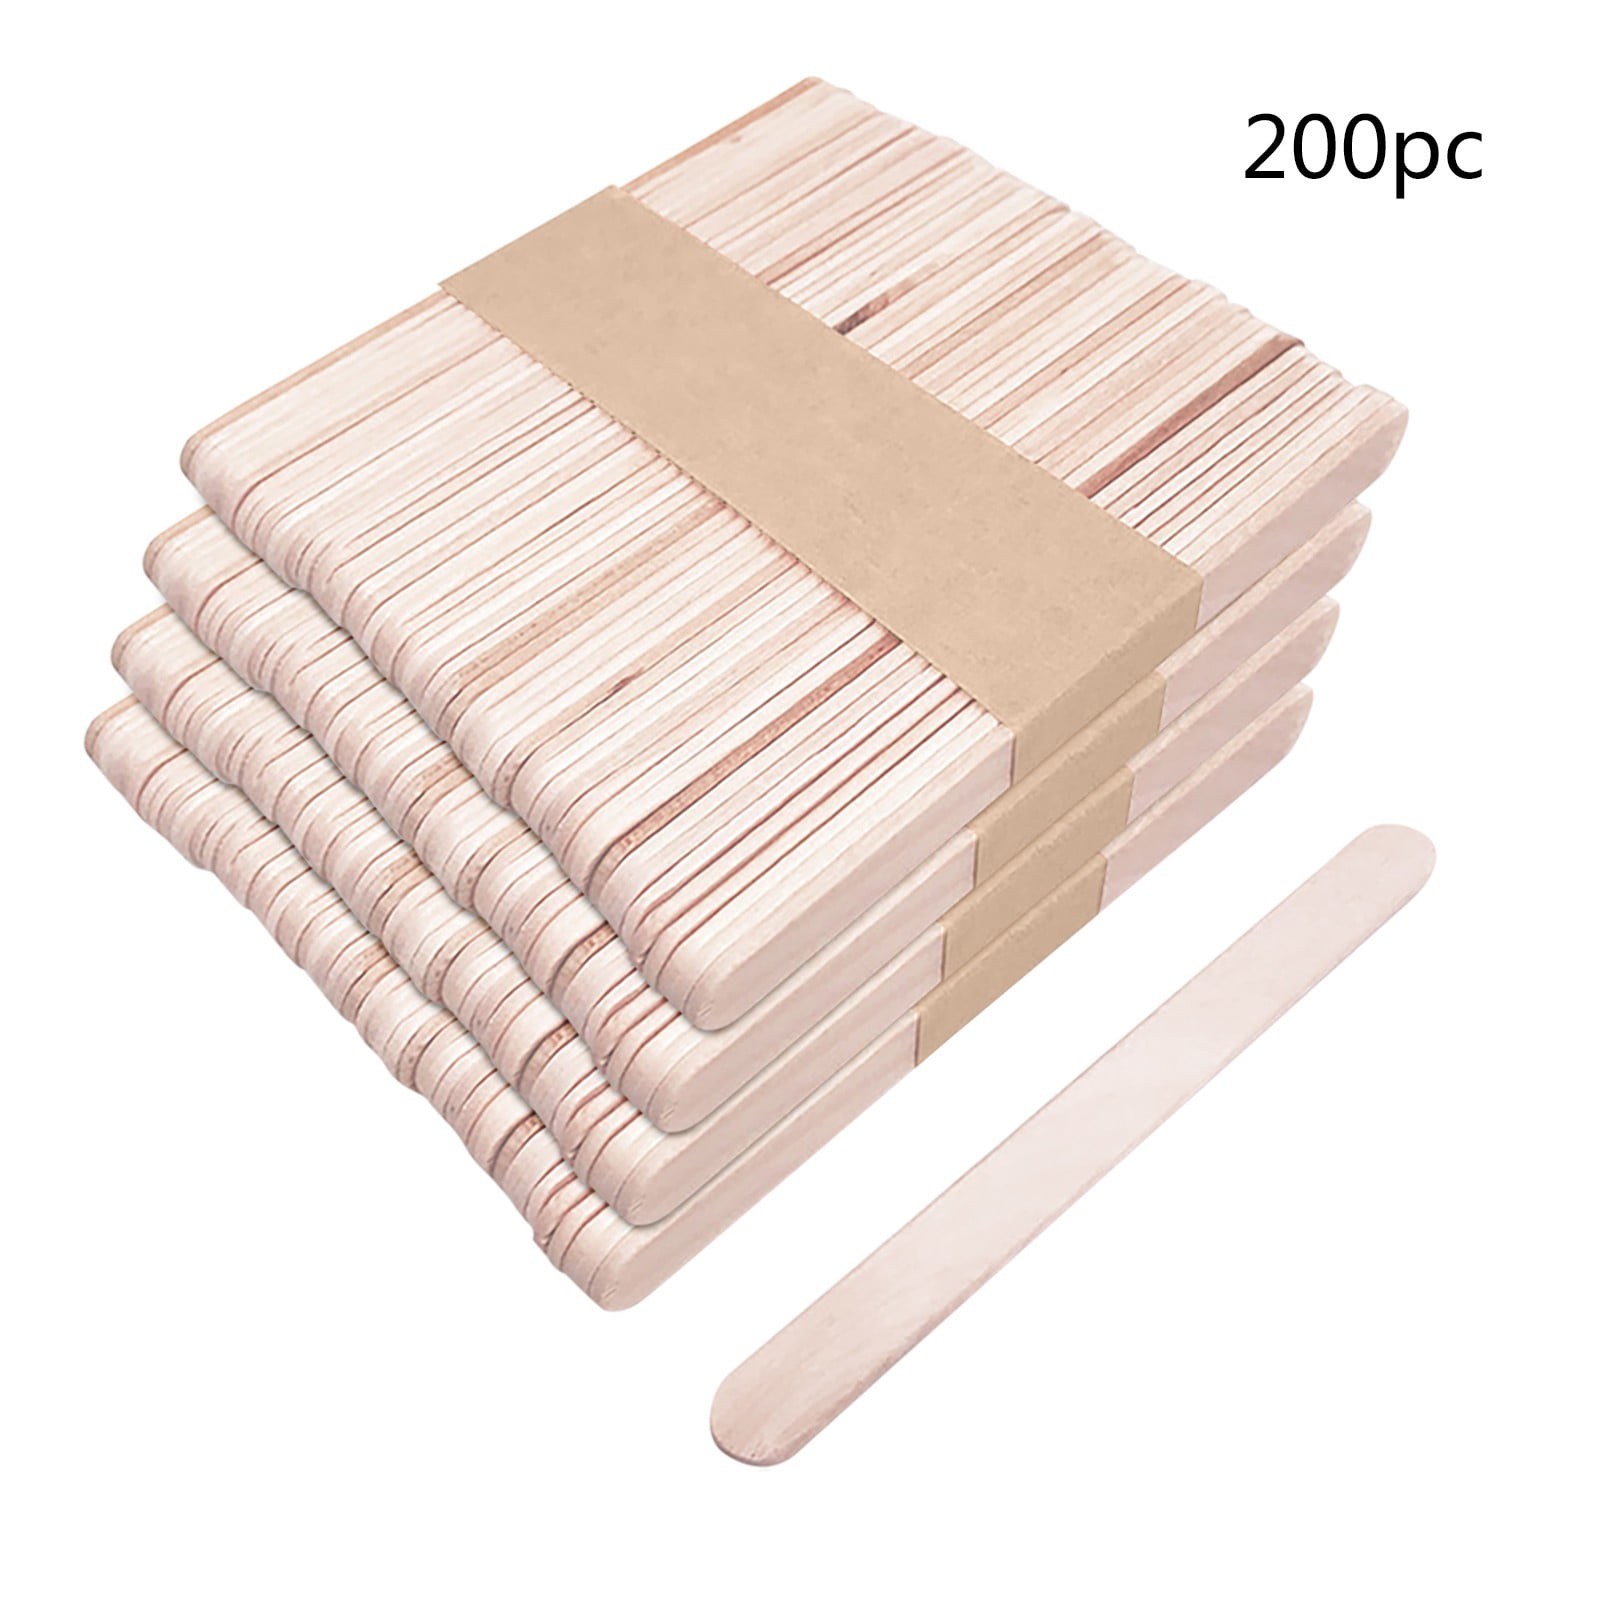 50/100/150 /200/300Count] Wooden Multi-Purpose Popsicle Sticks ,Craft,  ICES, Ice Cream, Wax, Waxing, Tongue Depressor Wood Sticks *4PCS 